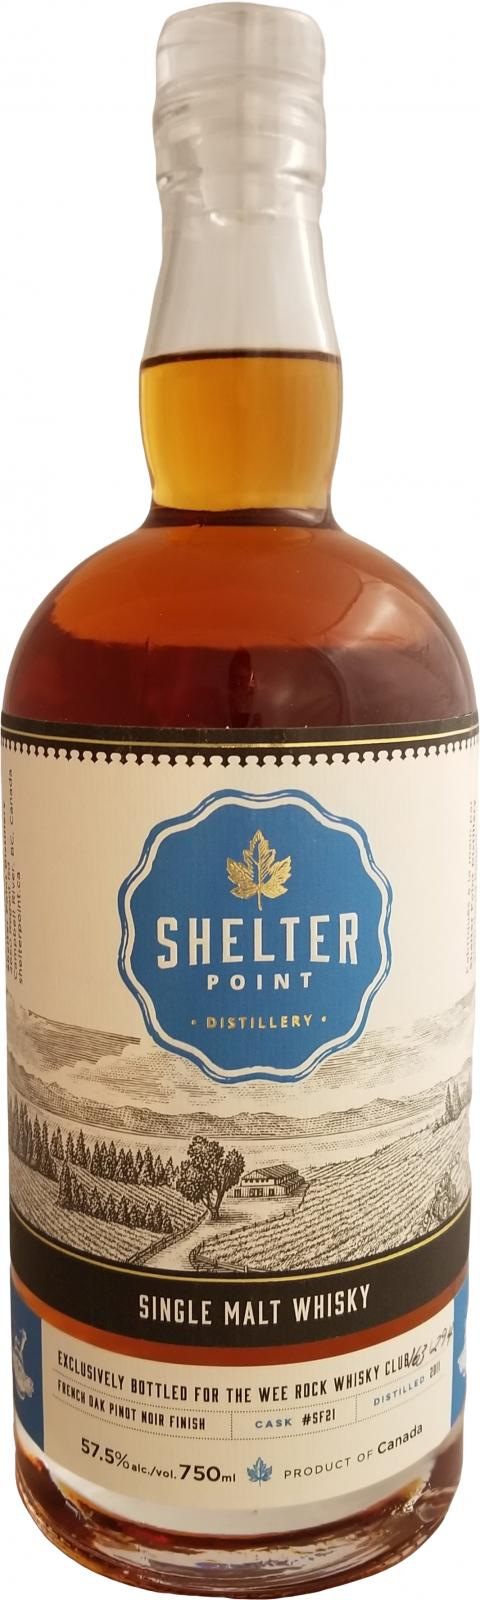 Shelter Point 2011 Single Malt Whisky French Oak Pinot Noir Finish SF21 The Wee Rock Whisky Club 57.5% 750ml